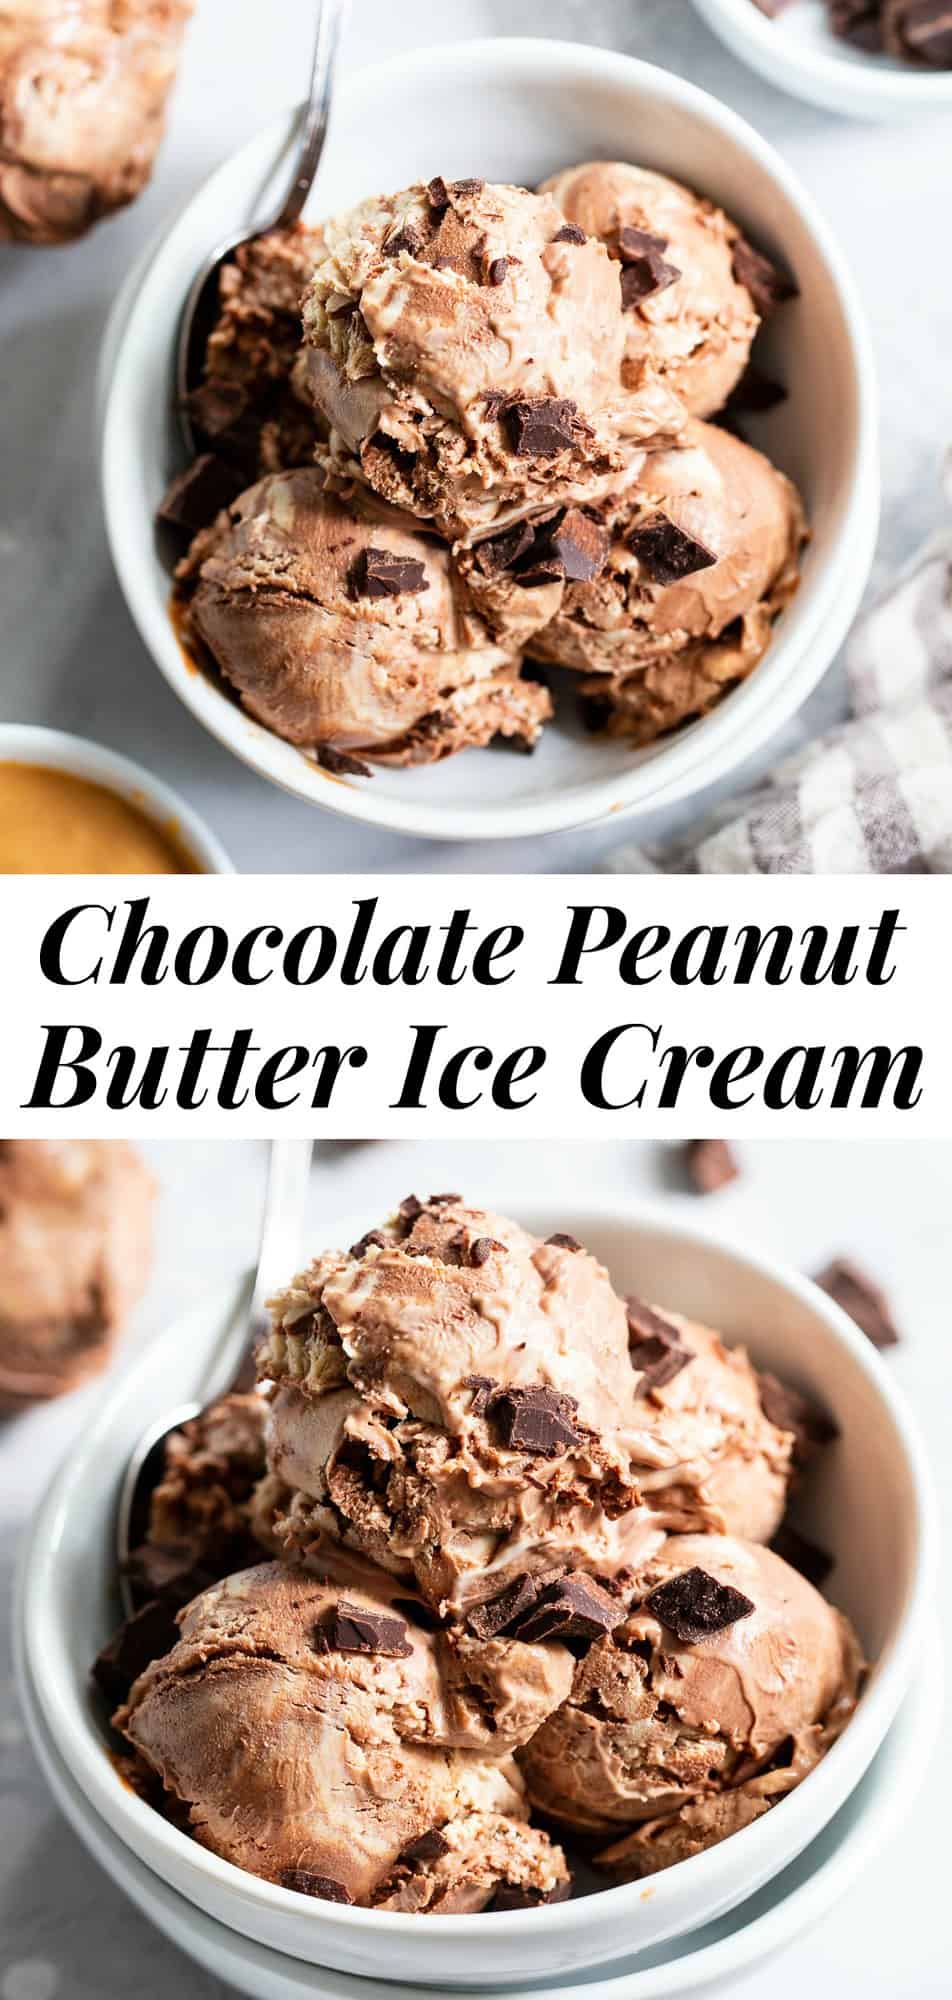 This paleo and vegan chocolate peanut butter ice cream is rich, creamy and super easy to make!   No-churn chocolate ice cream is swirled with a peanut butter layer (or other nut butter) and dark chocolate chunks.  It’s family approved and irresistibly chocolatey! #paleo #vegan #veganicecream #icecream